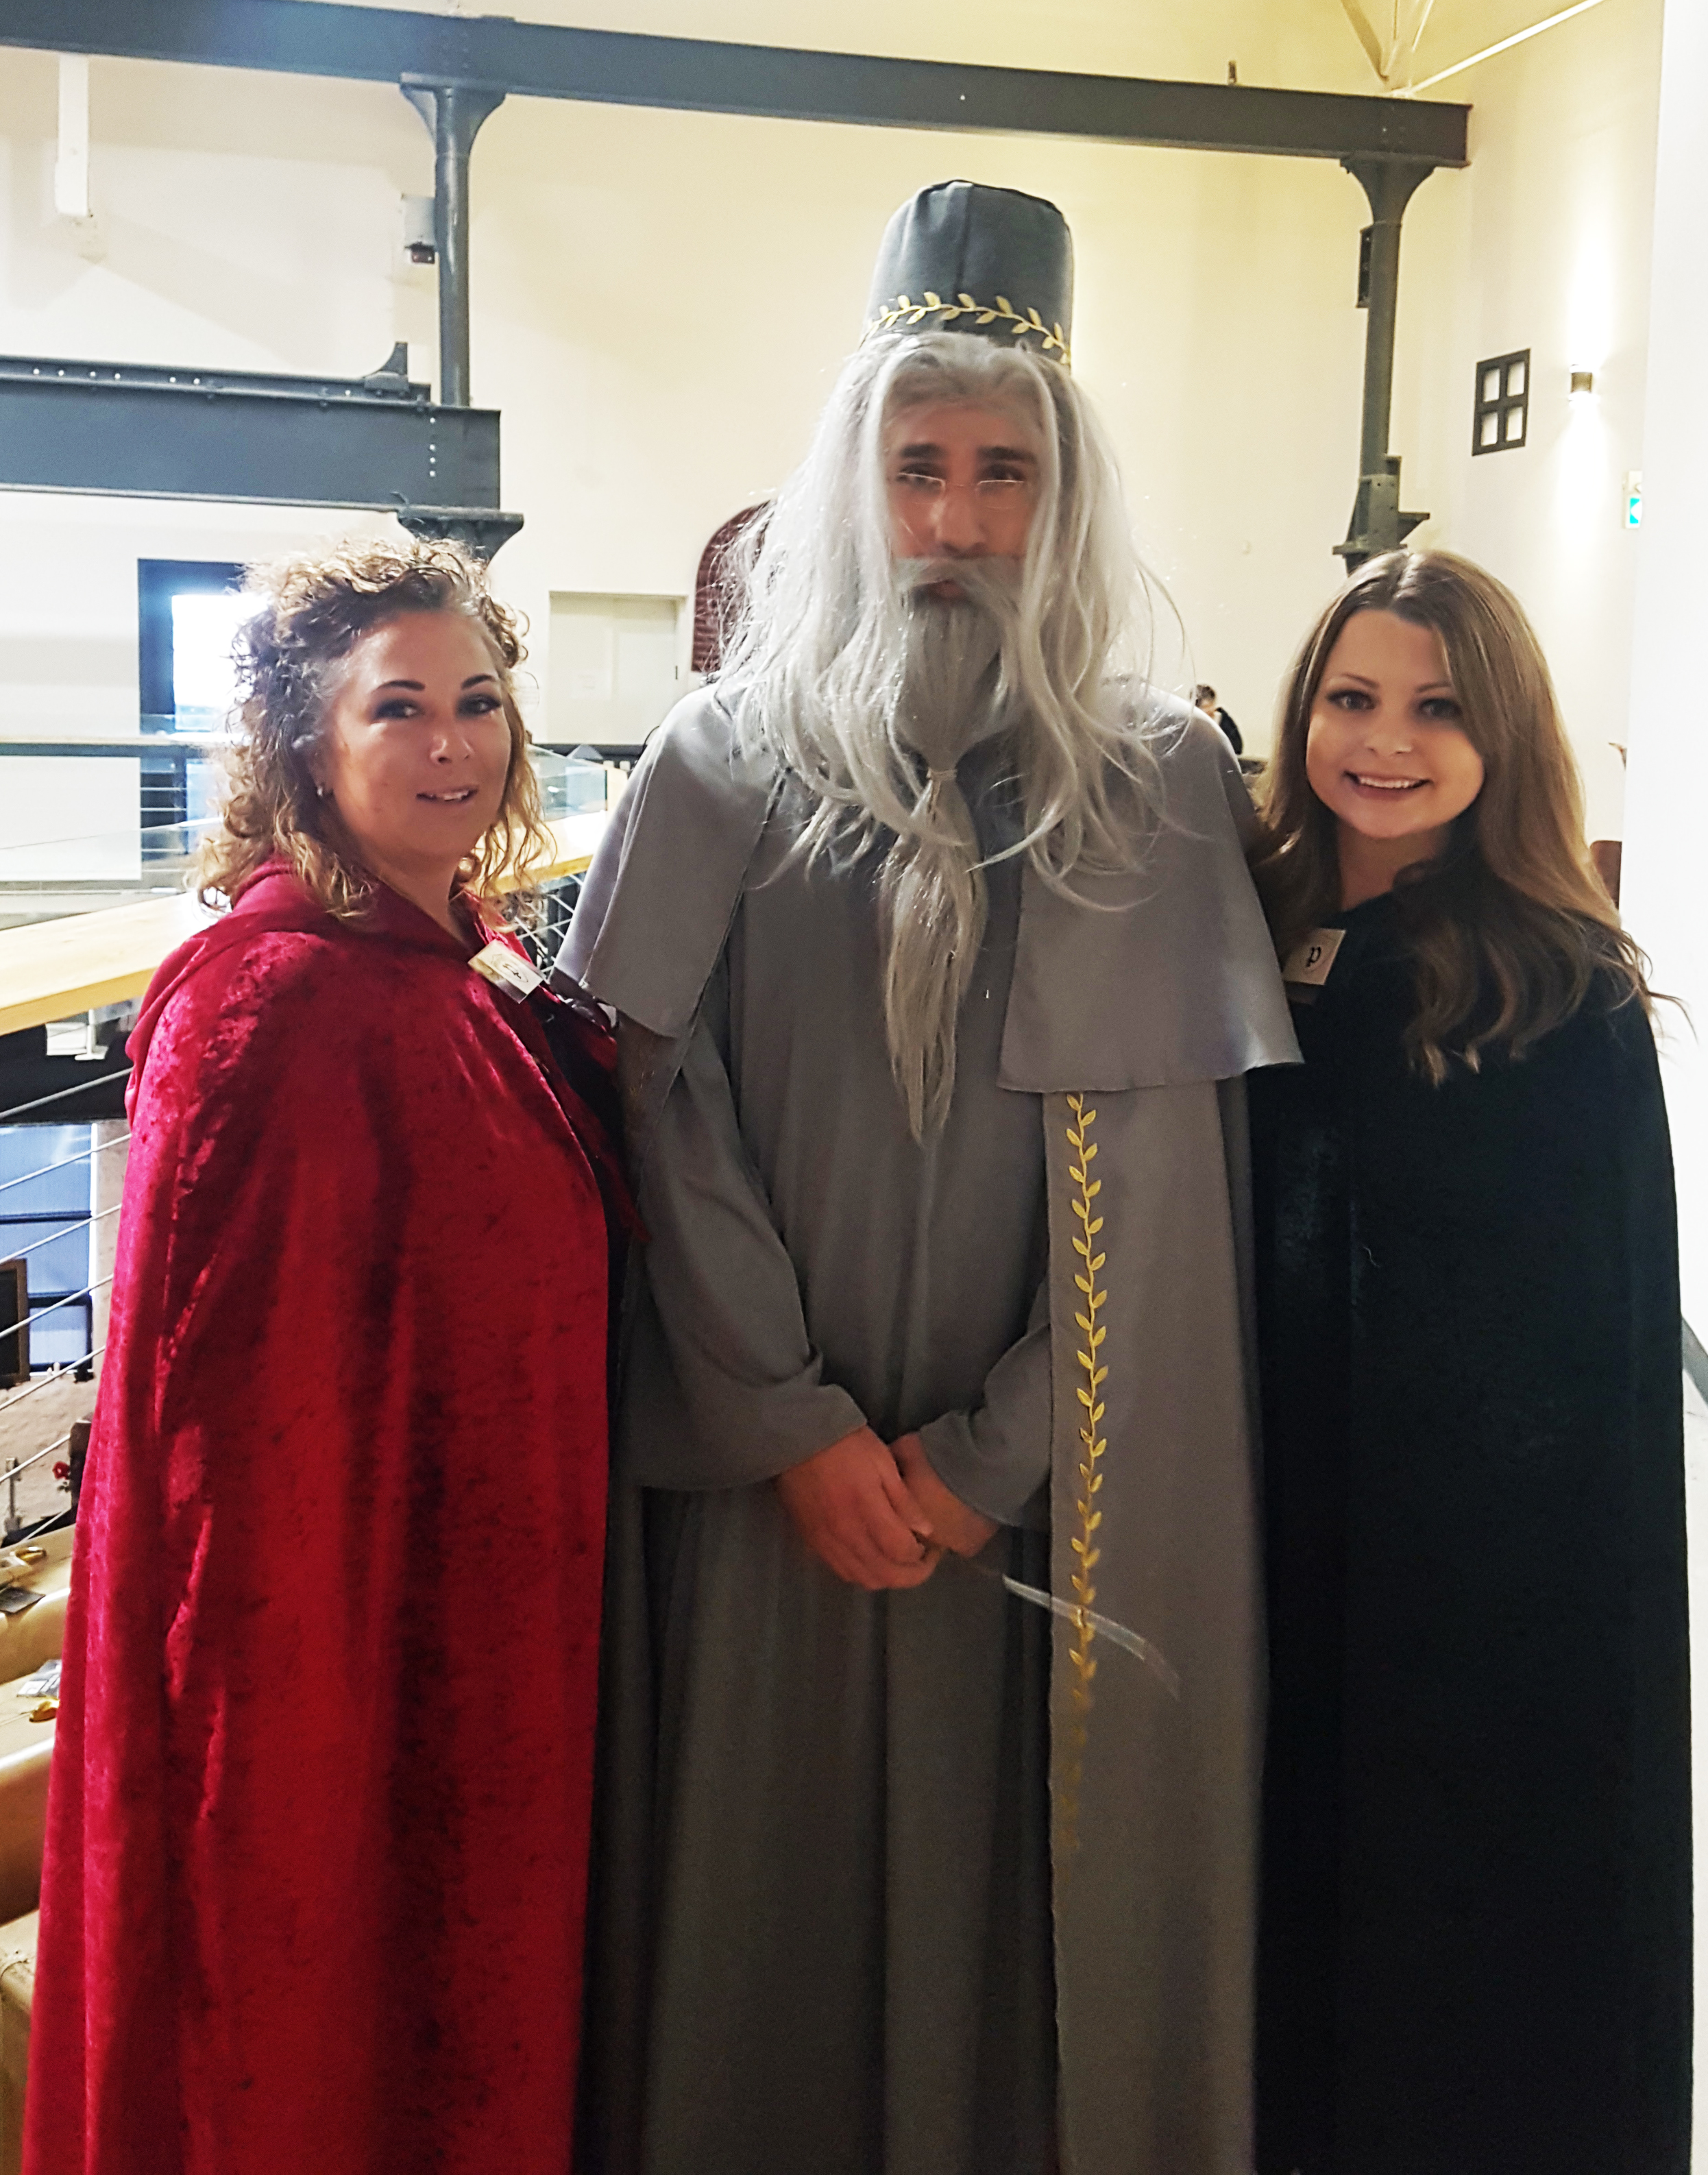 The Canadian Cancer Society, An Evening at Hogwarts 2019